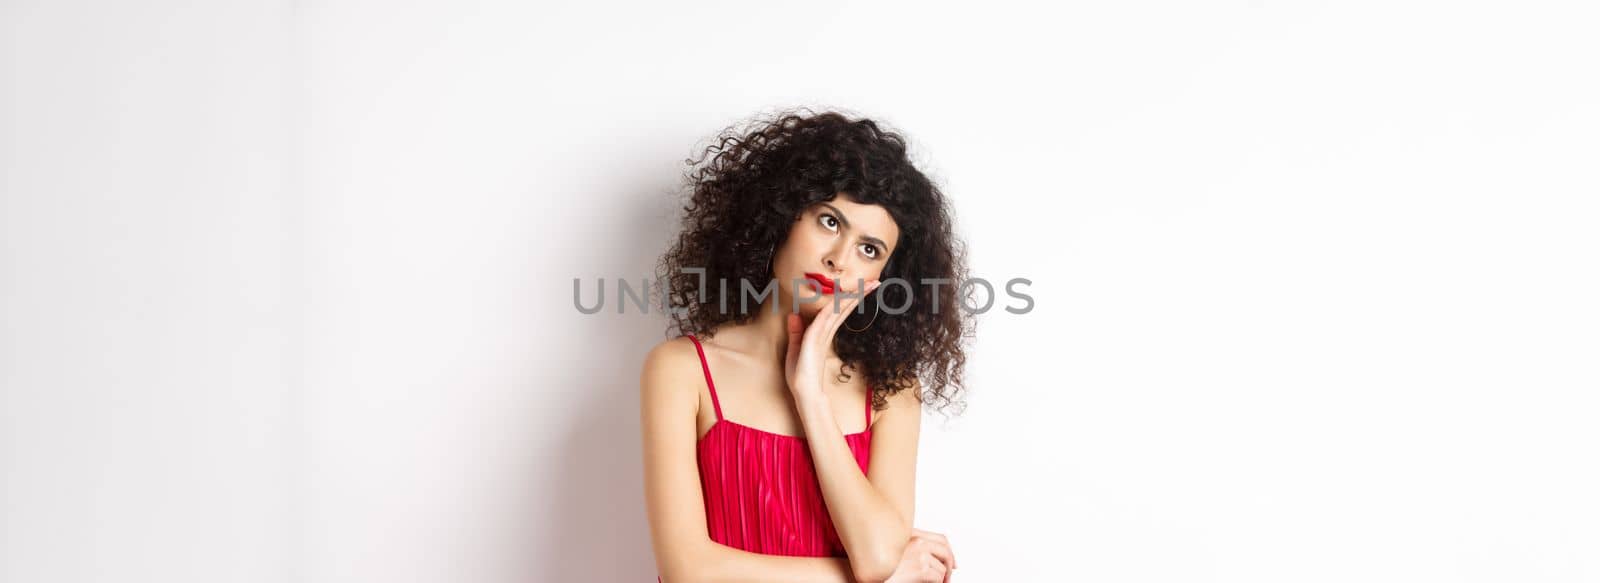 Annoyed and bored young woman with curly hair, look away distressed, lean face on hand, standing bothered in red dress on white background.